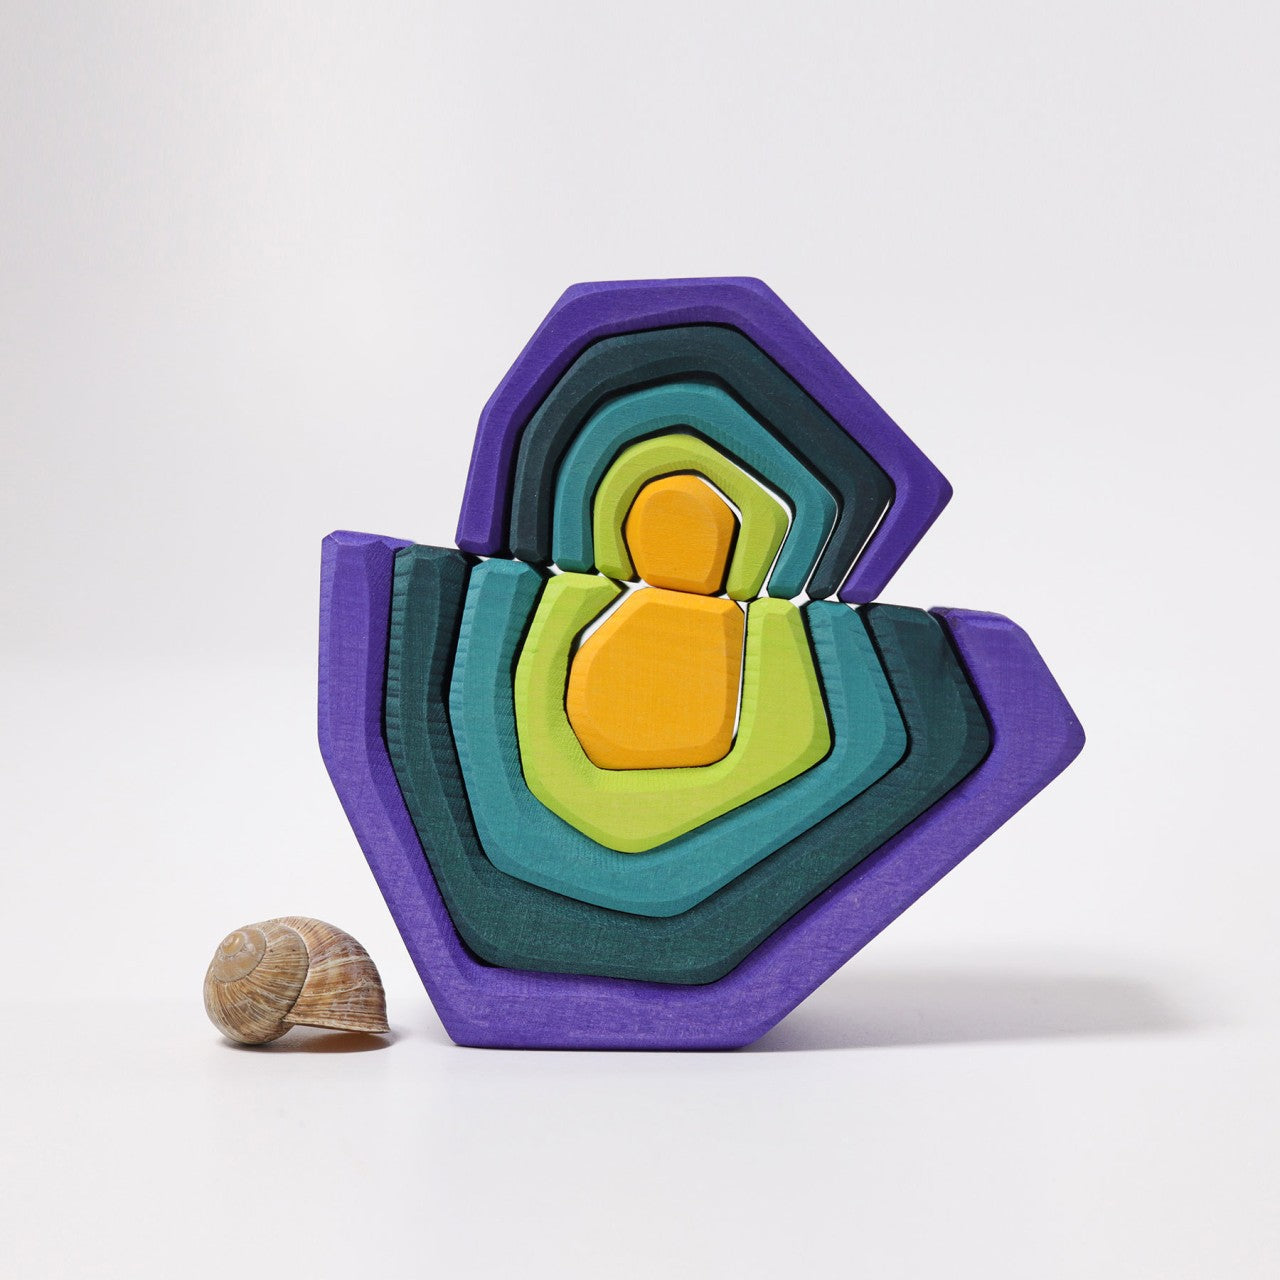 Small Earth | 5 Pieces | Wooden Toys for Kids | Open-Ended Play